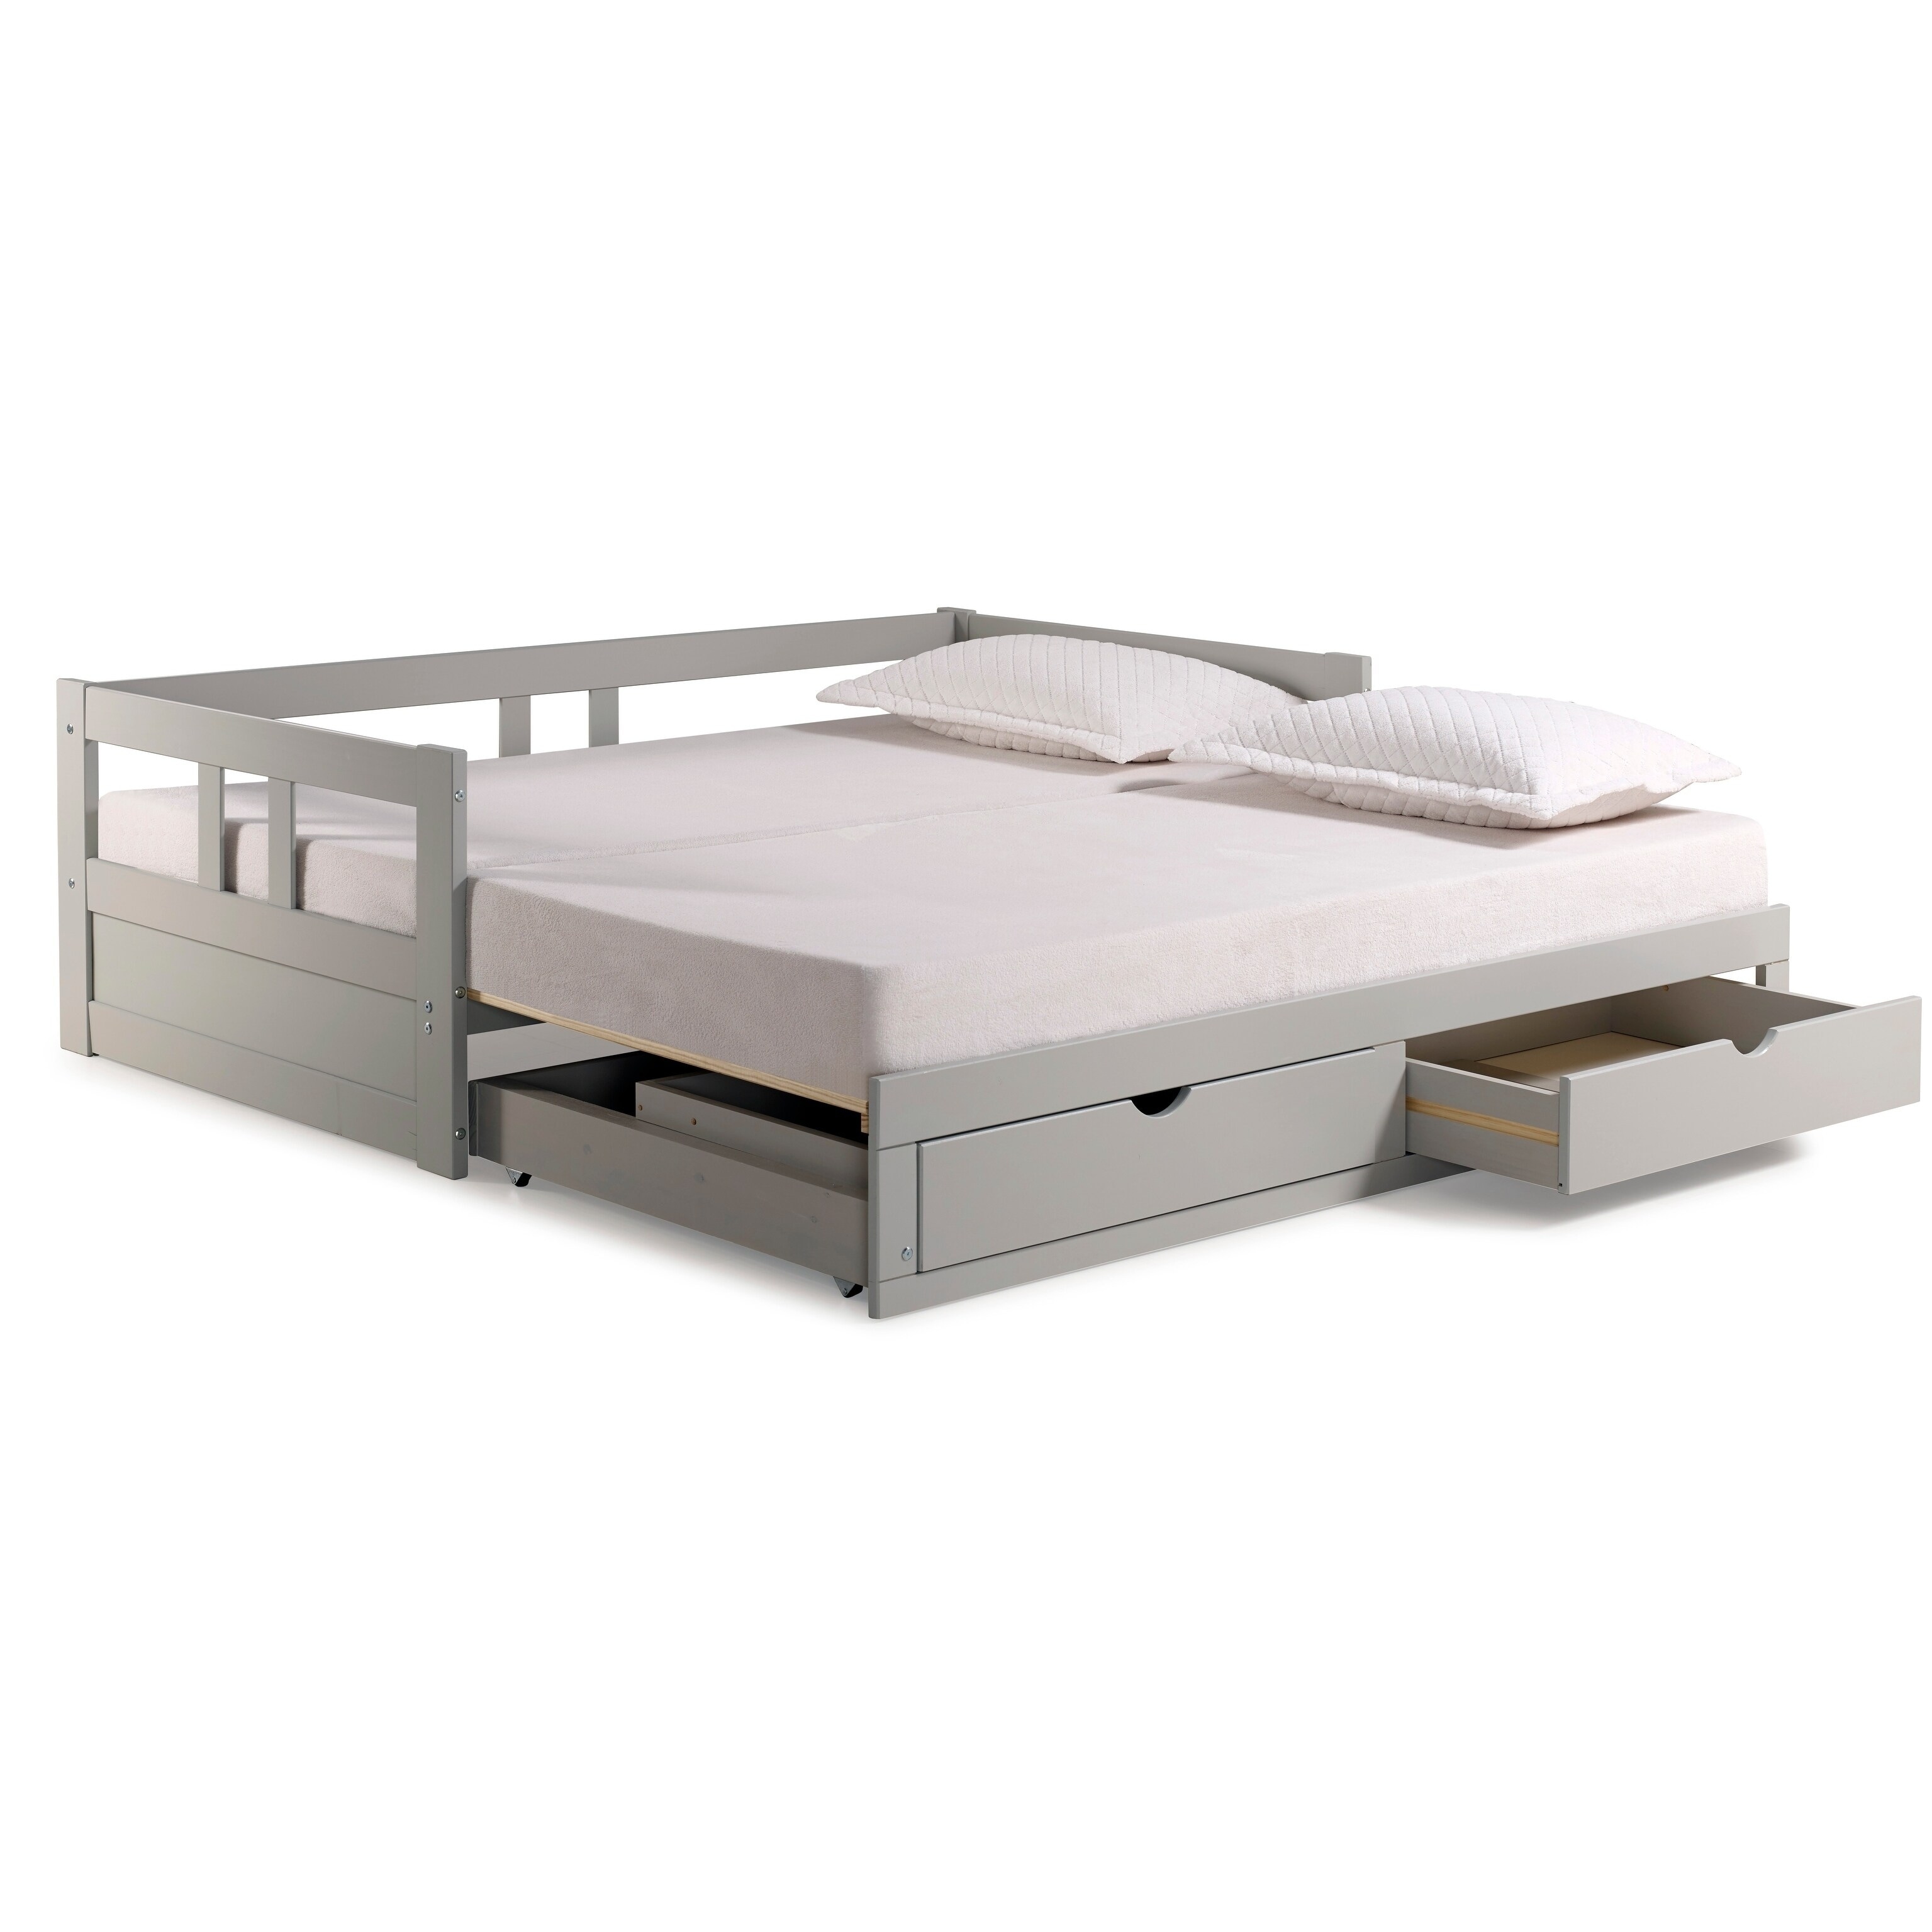 https://ak1.ostkcdn.com/images/products/is/images/direct/3ab695d92fd7eb530f5249bb0d59eece28911358/Melody-Expandable-Twin-to-King-Trundle-Daybed-with-Storage-Drawers.jpg